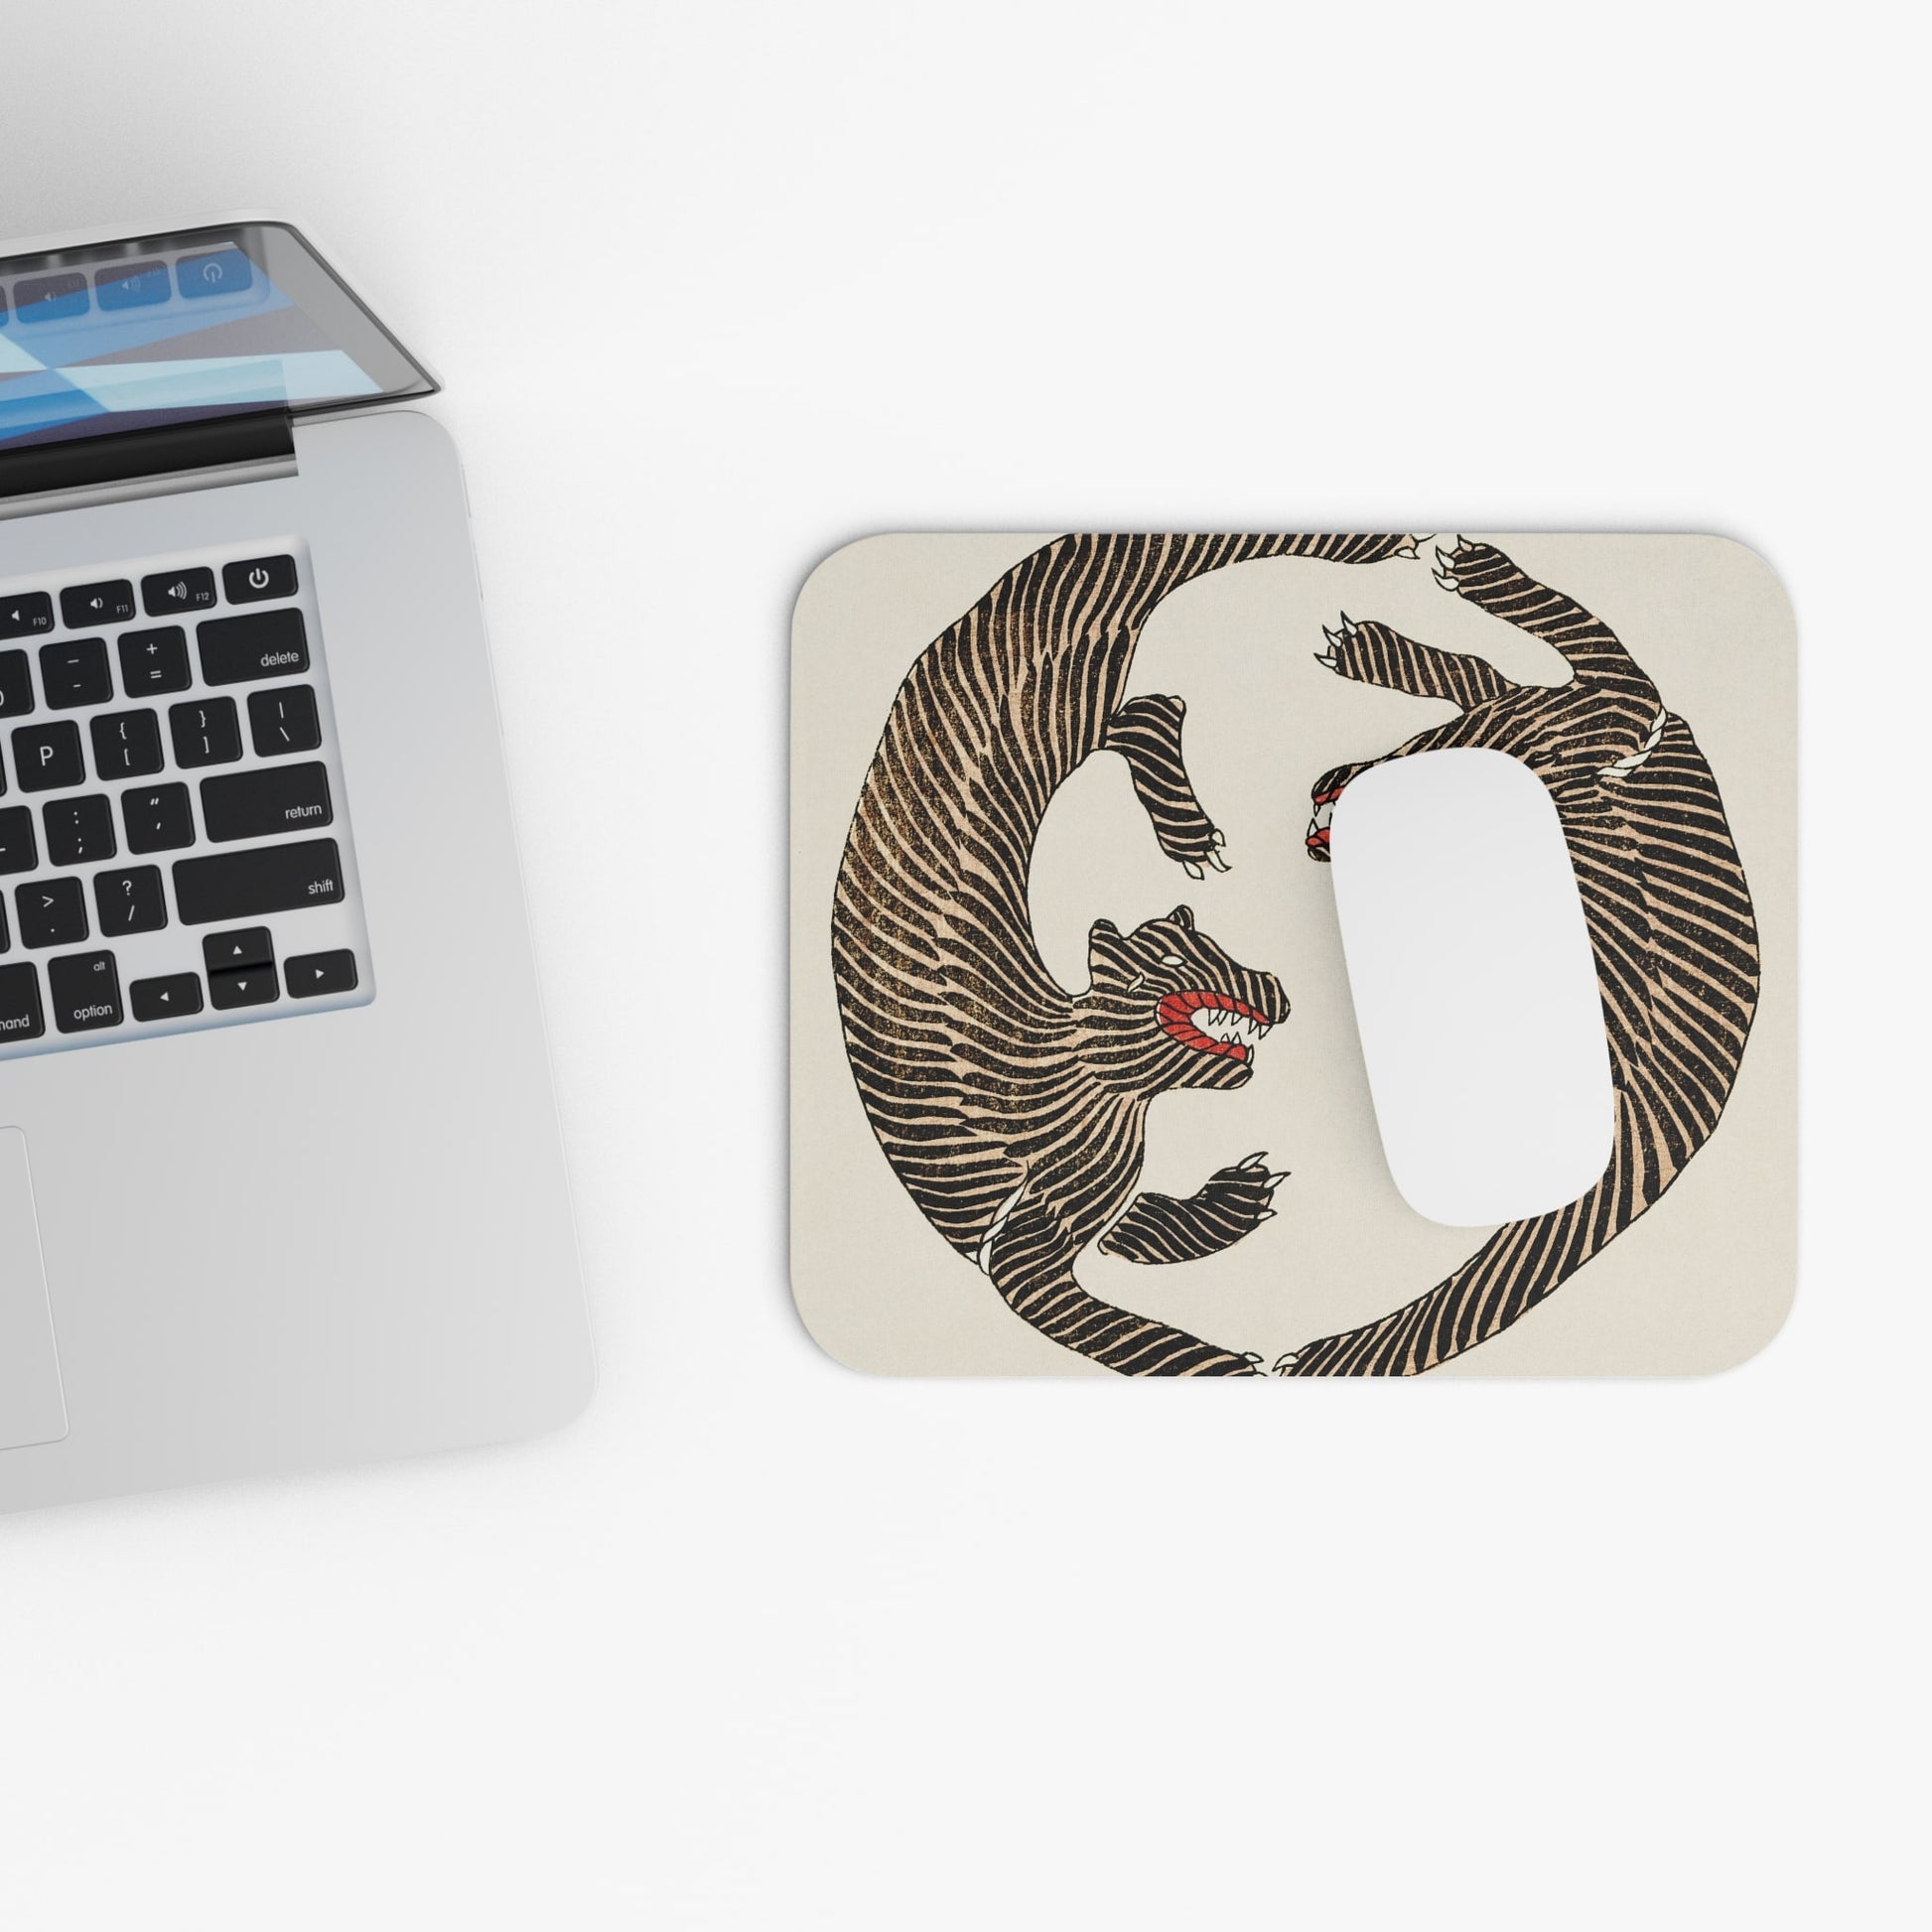 Vintage Cool Tiger Design Laptop Mouse Pad with White Mouse